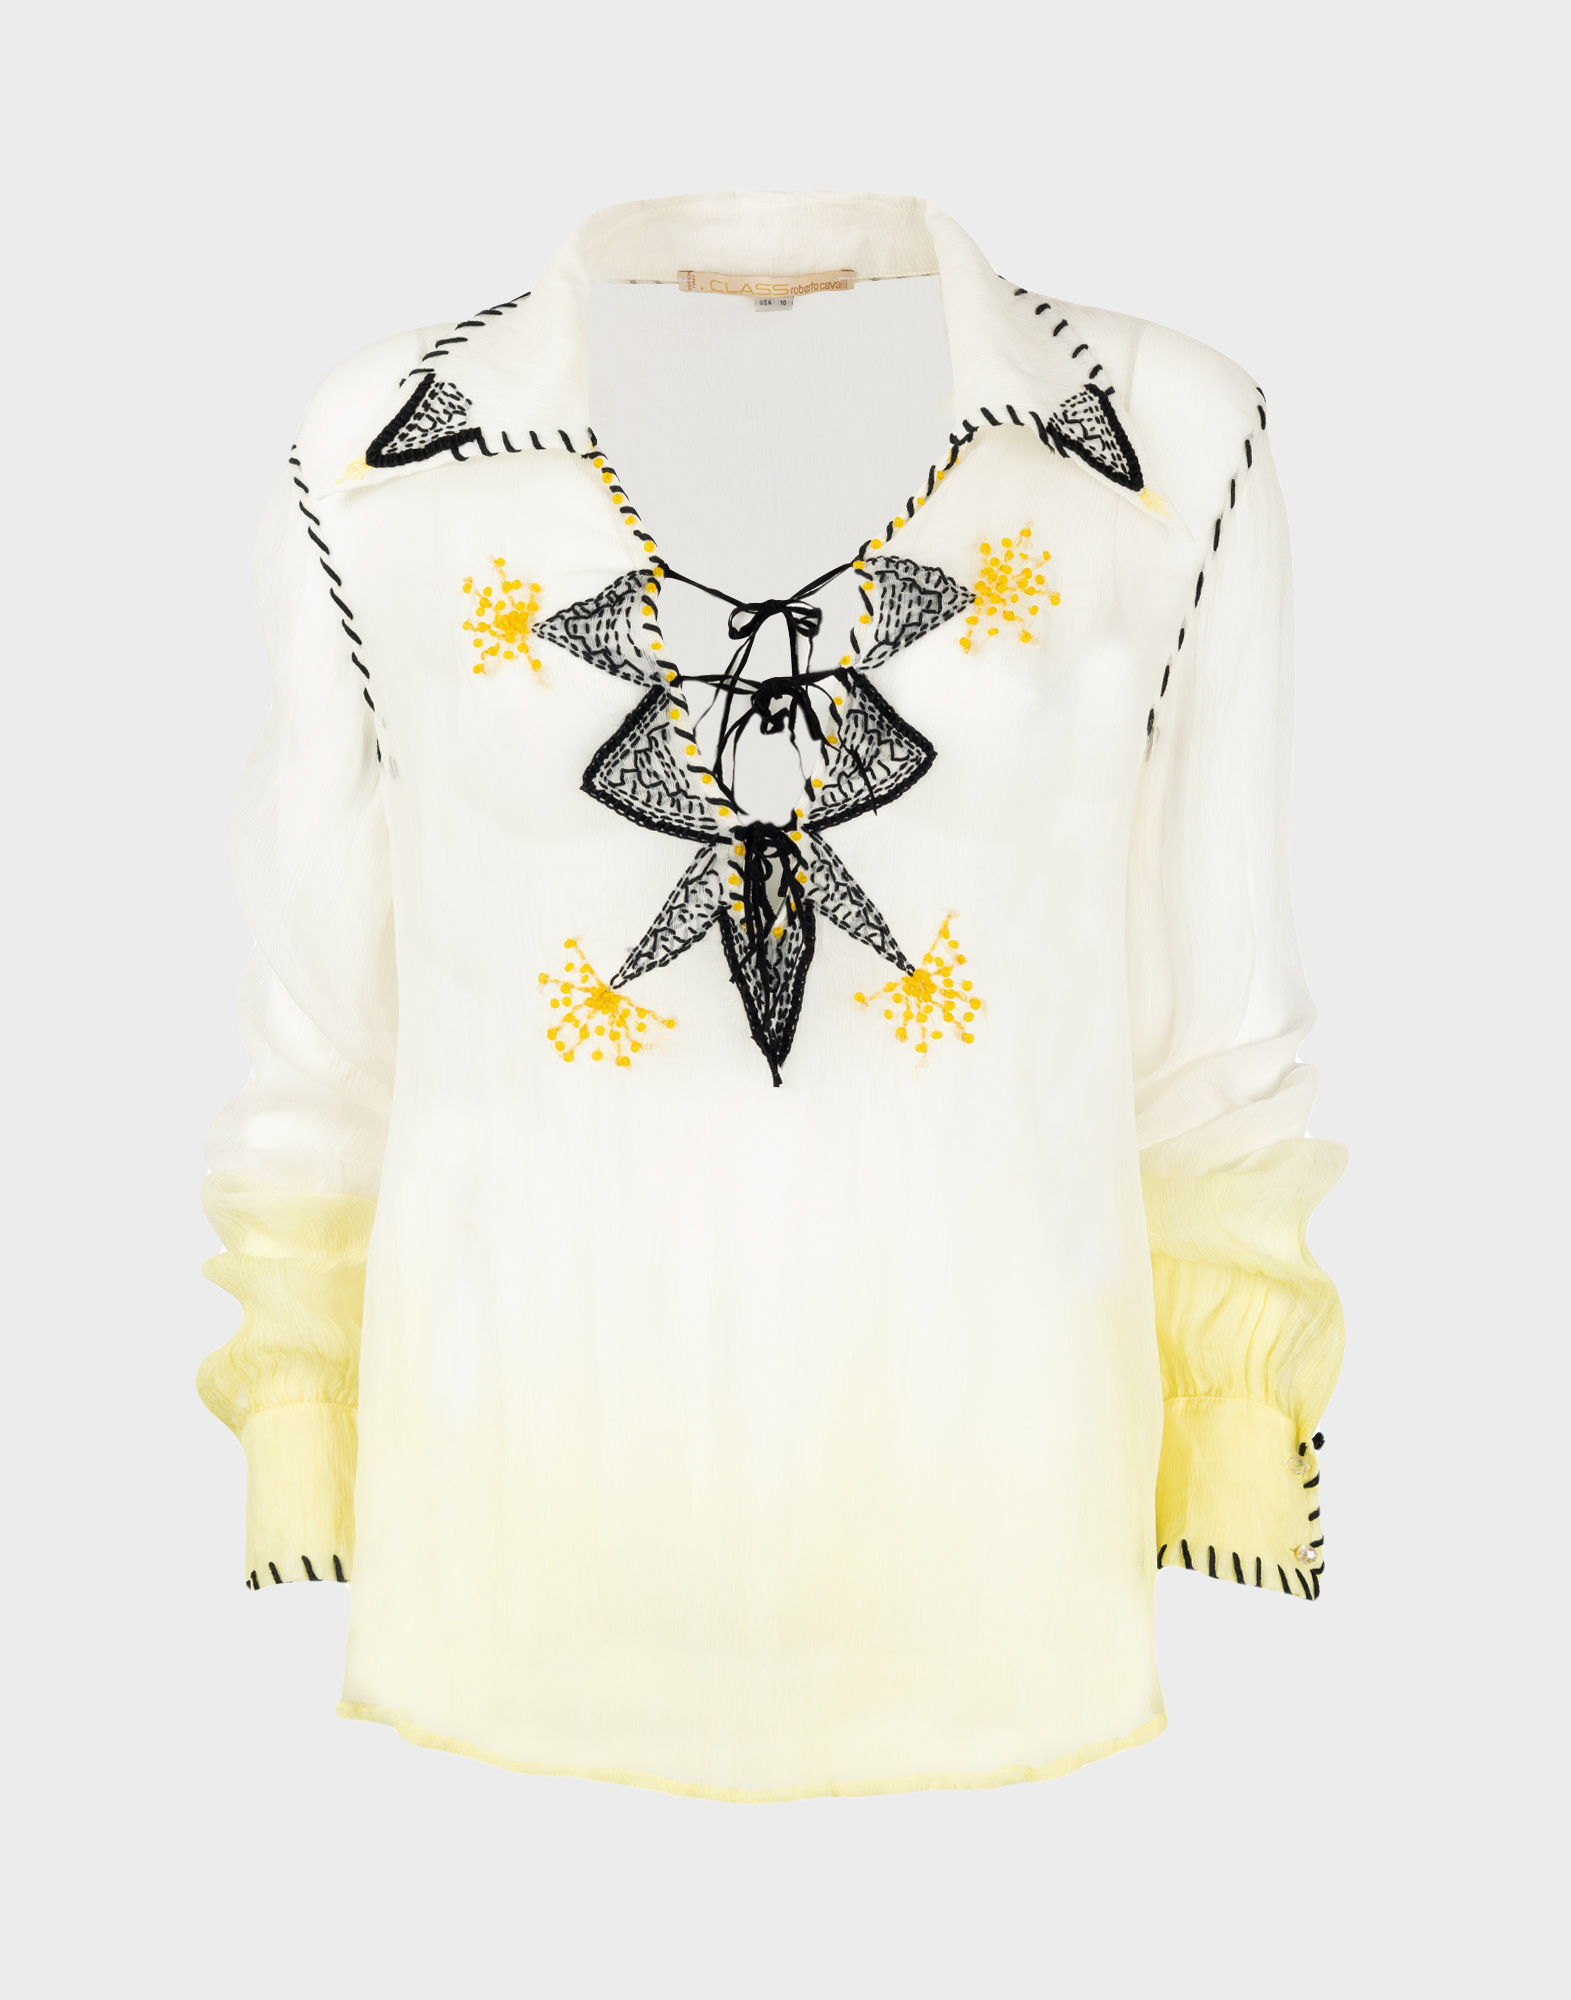 white and yellow long-sleeved transparent women's blouse with black embroidery and details, yellow beads applied